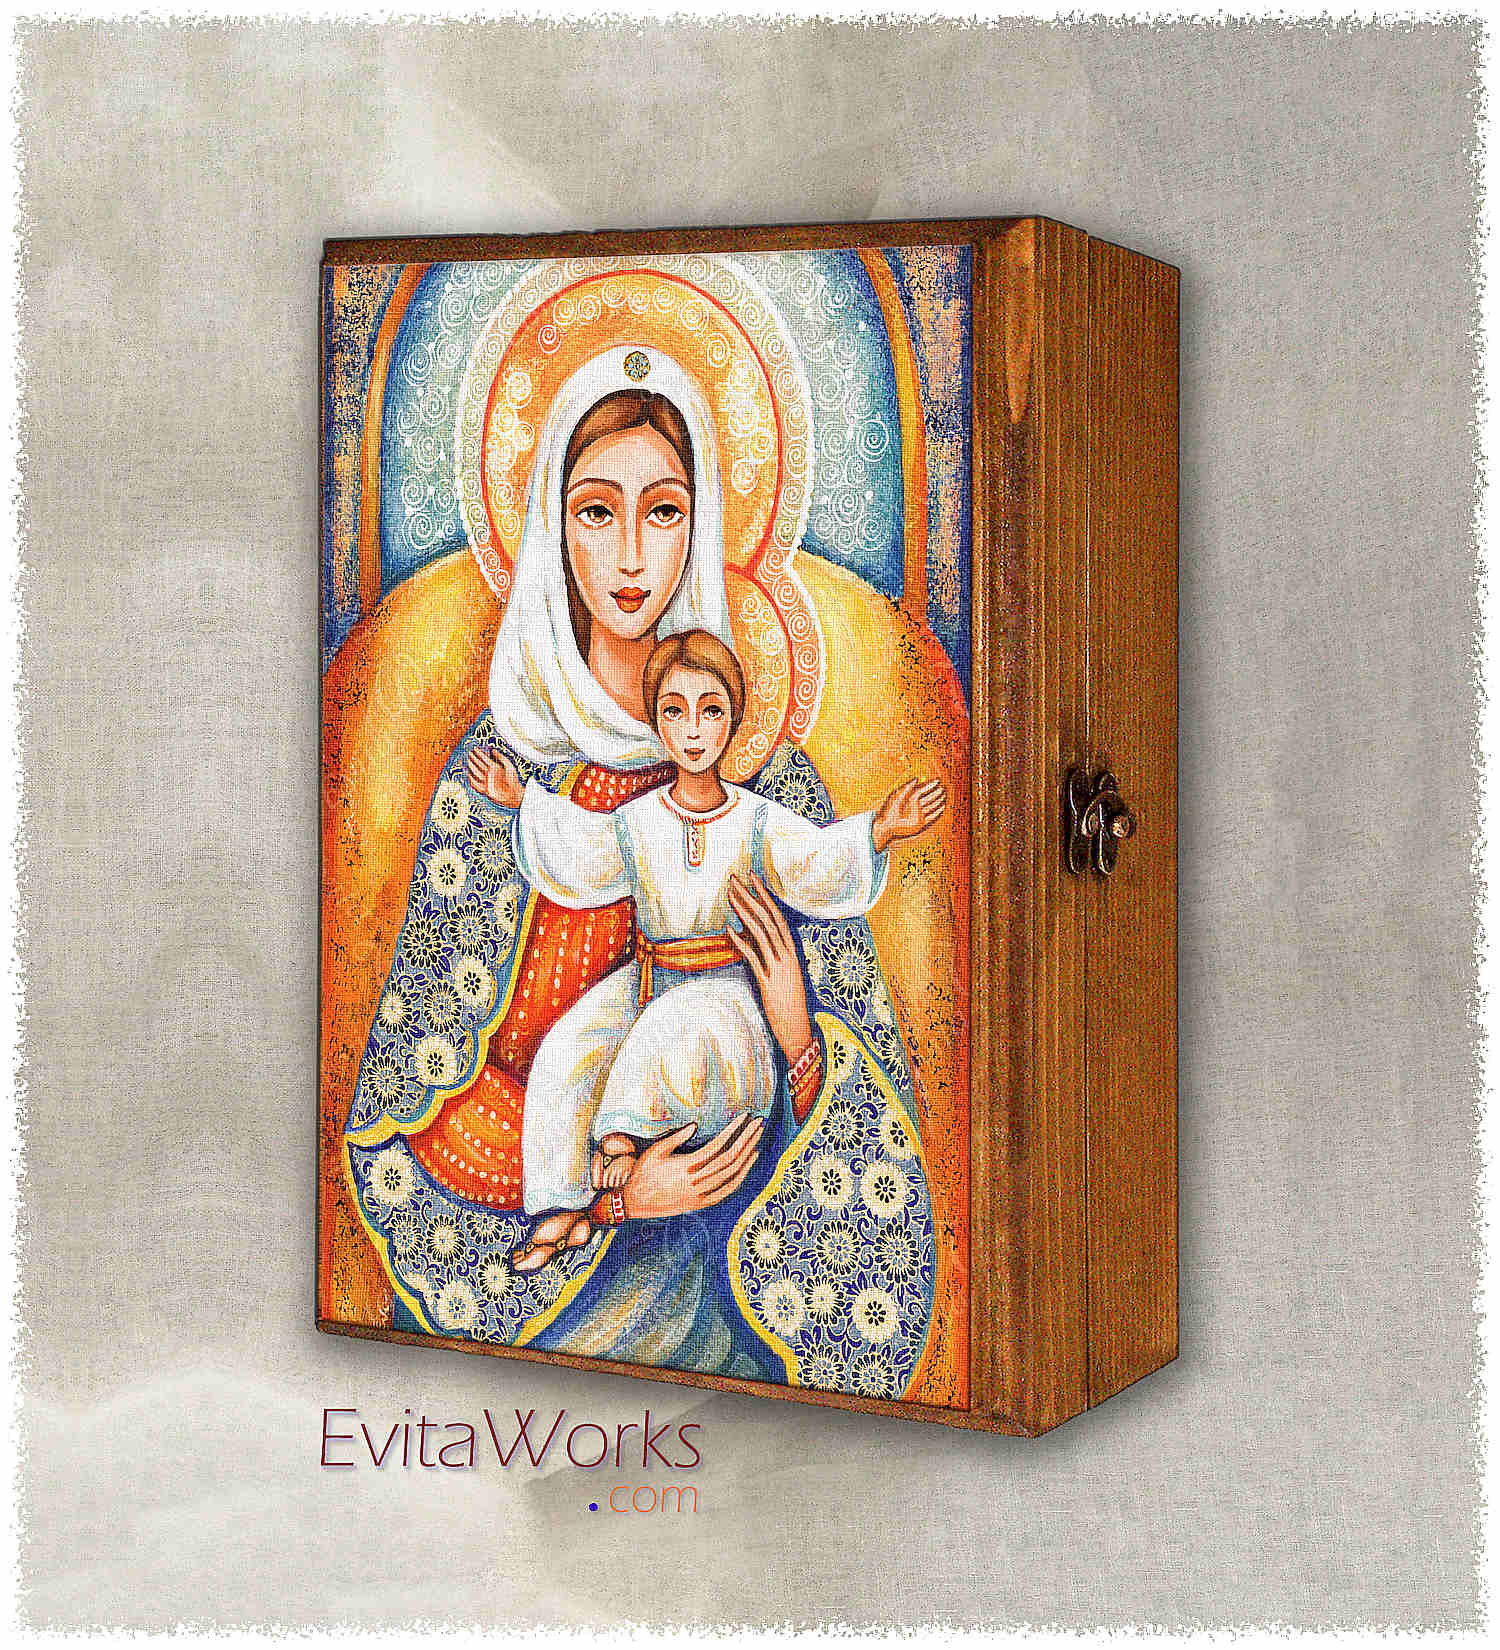 Hit to learn about "Heavenly Grace, Madonna and Child" on jewelboxes